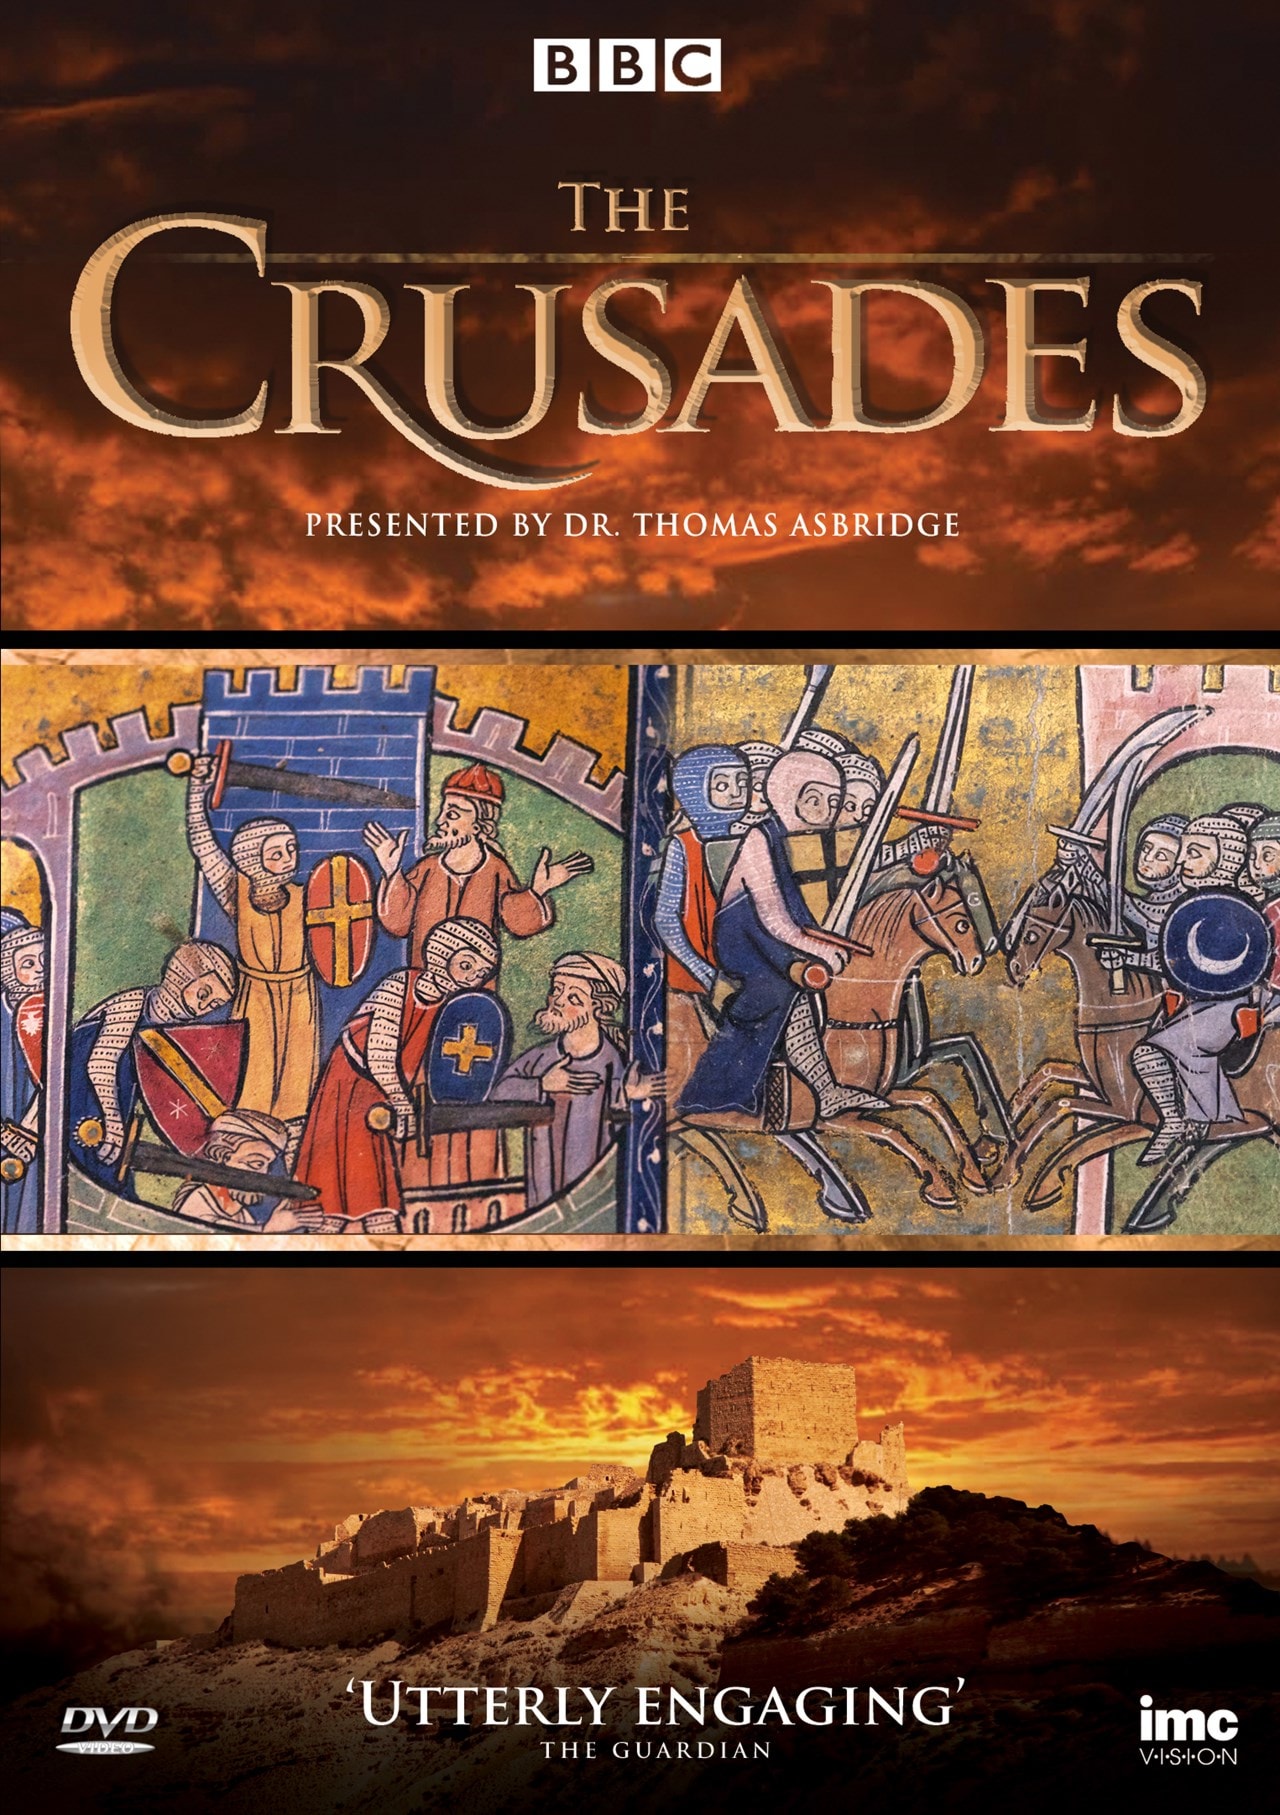 The Crusades | DVD | Free shipping over £20 | HMV Store